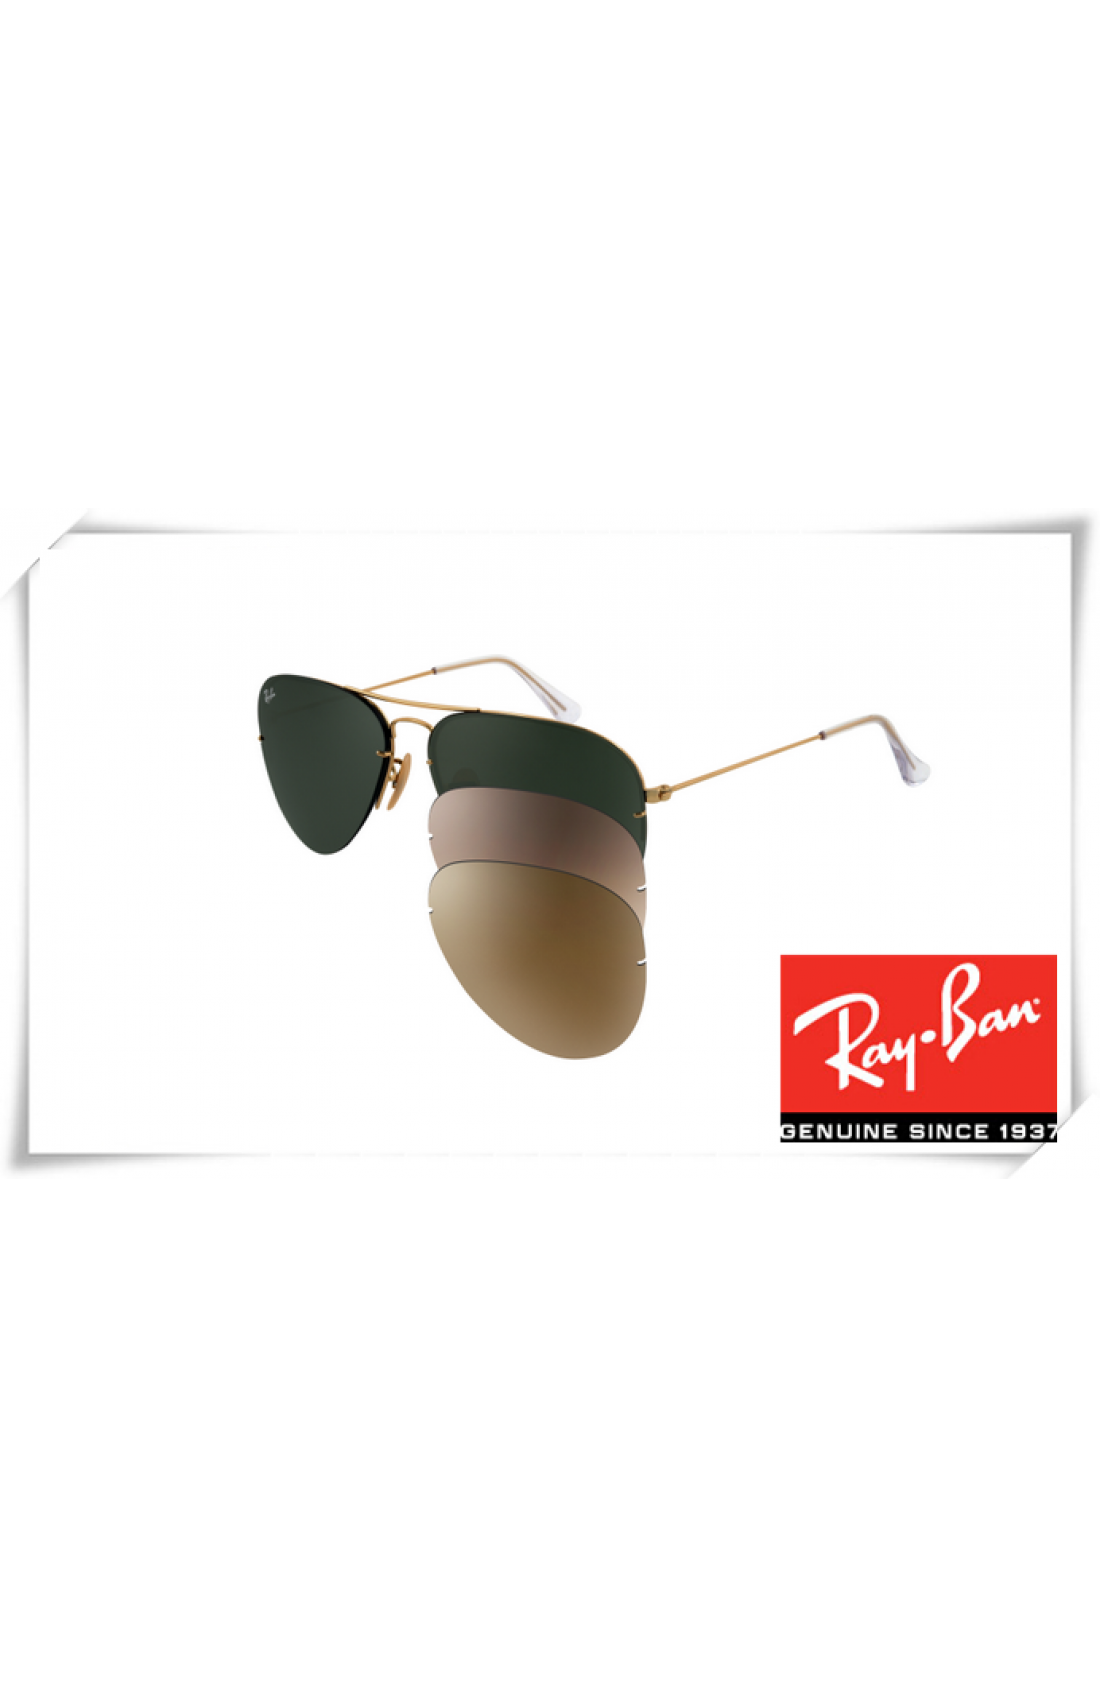 flip out ray ban